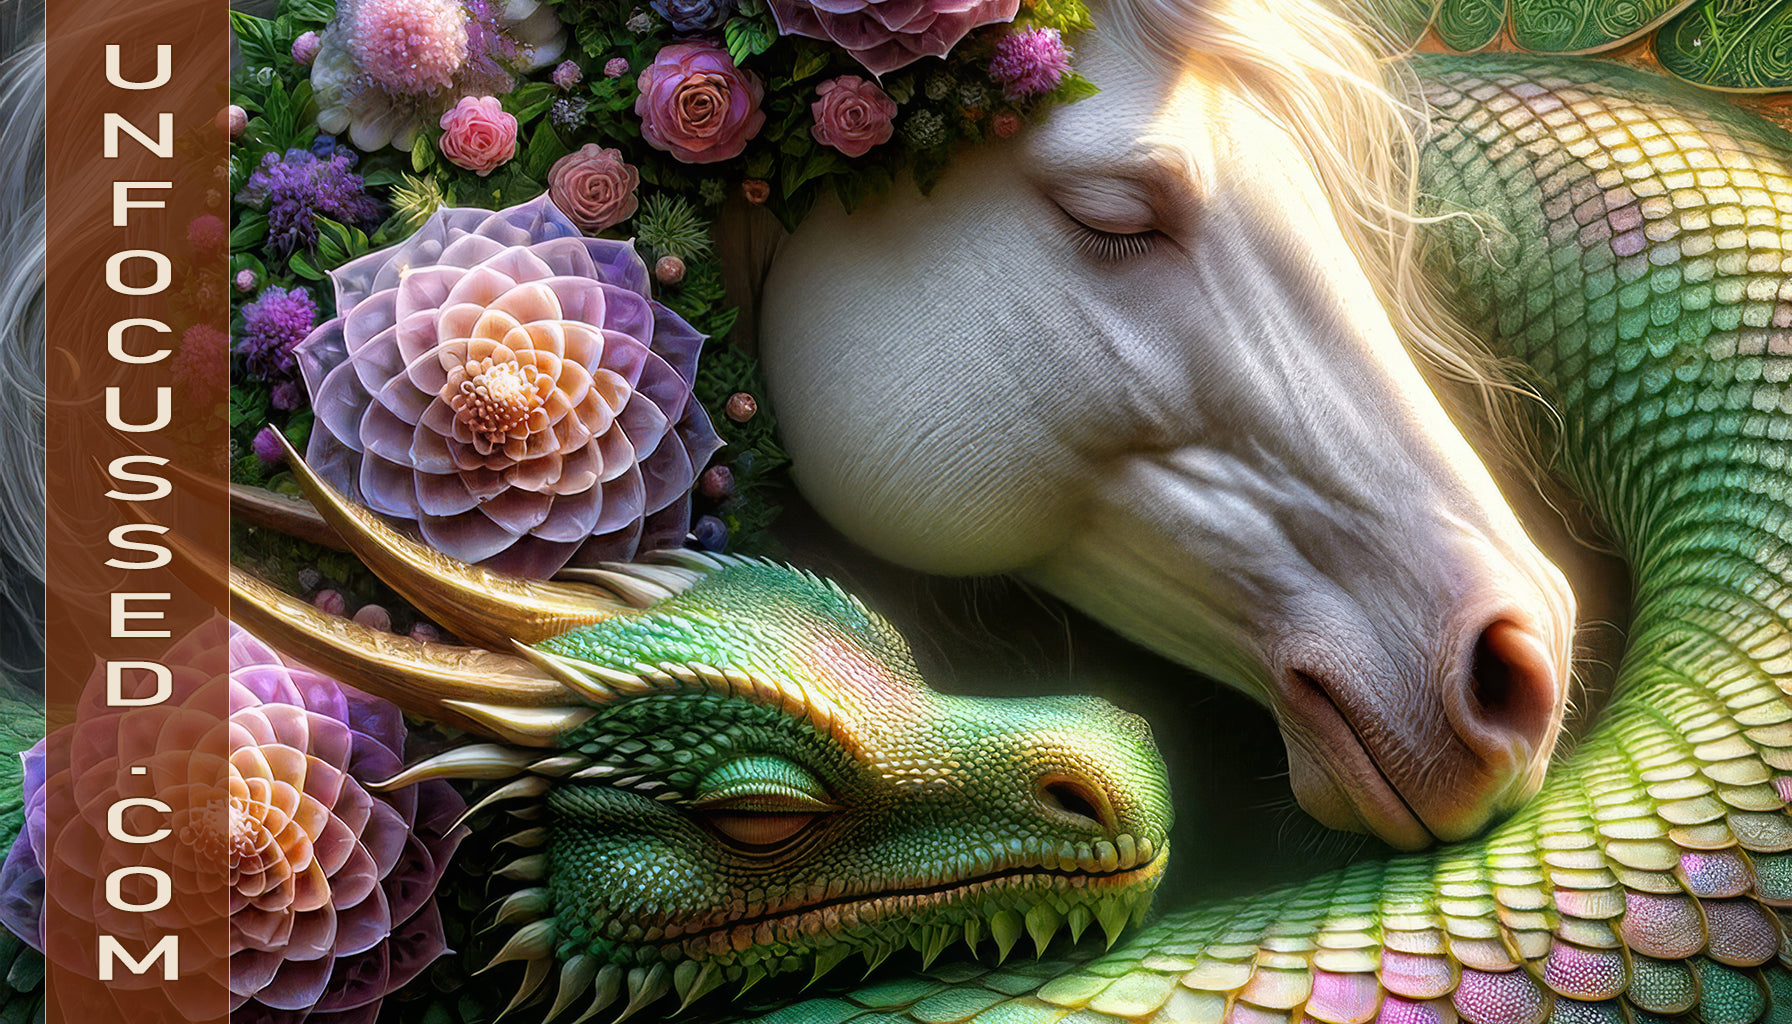 The Serenity of the Fabled: A Unicorn and Dragon's Peace